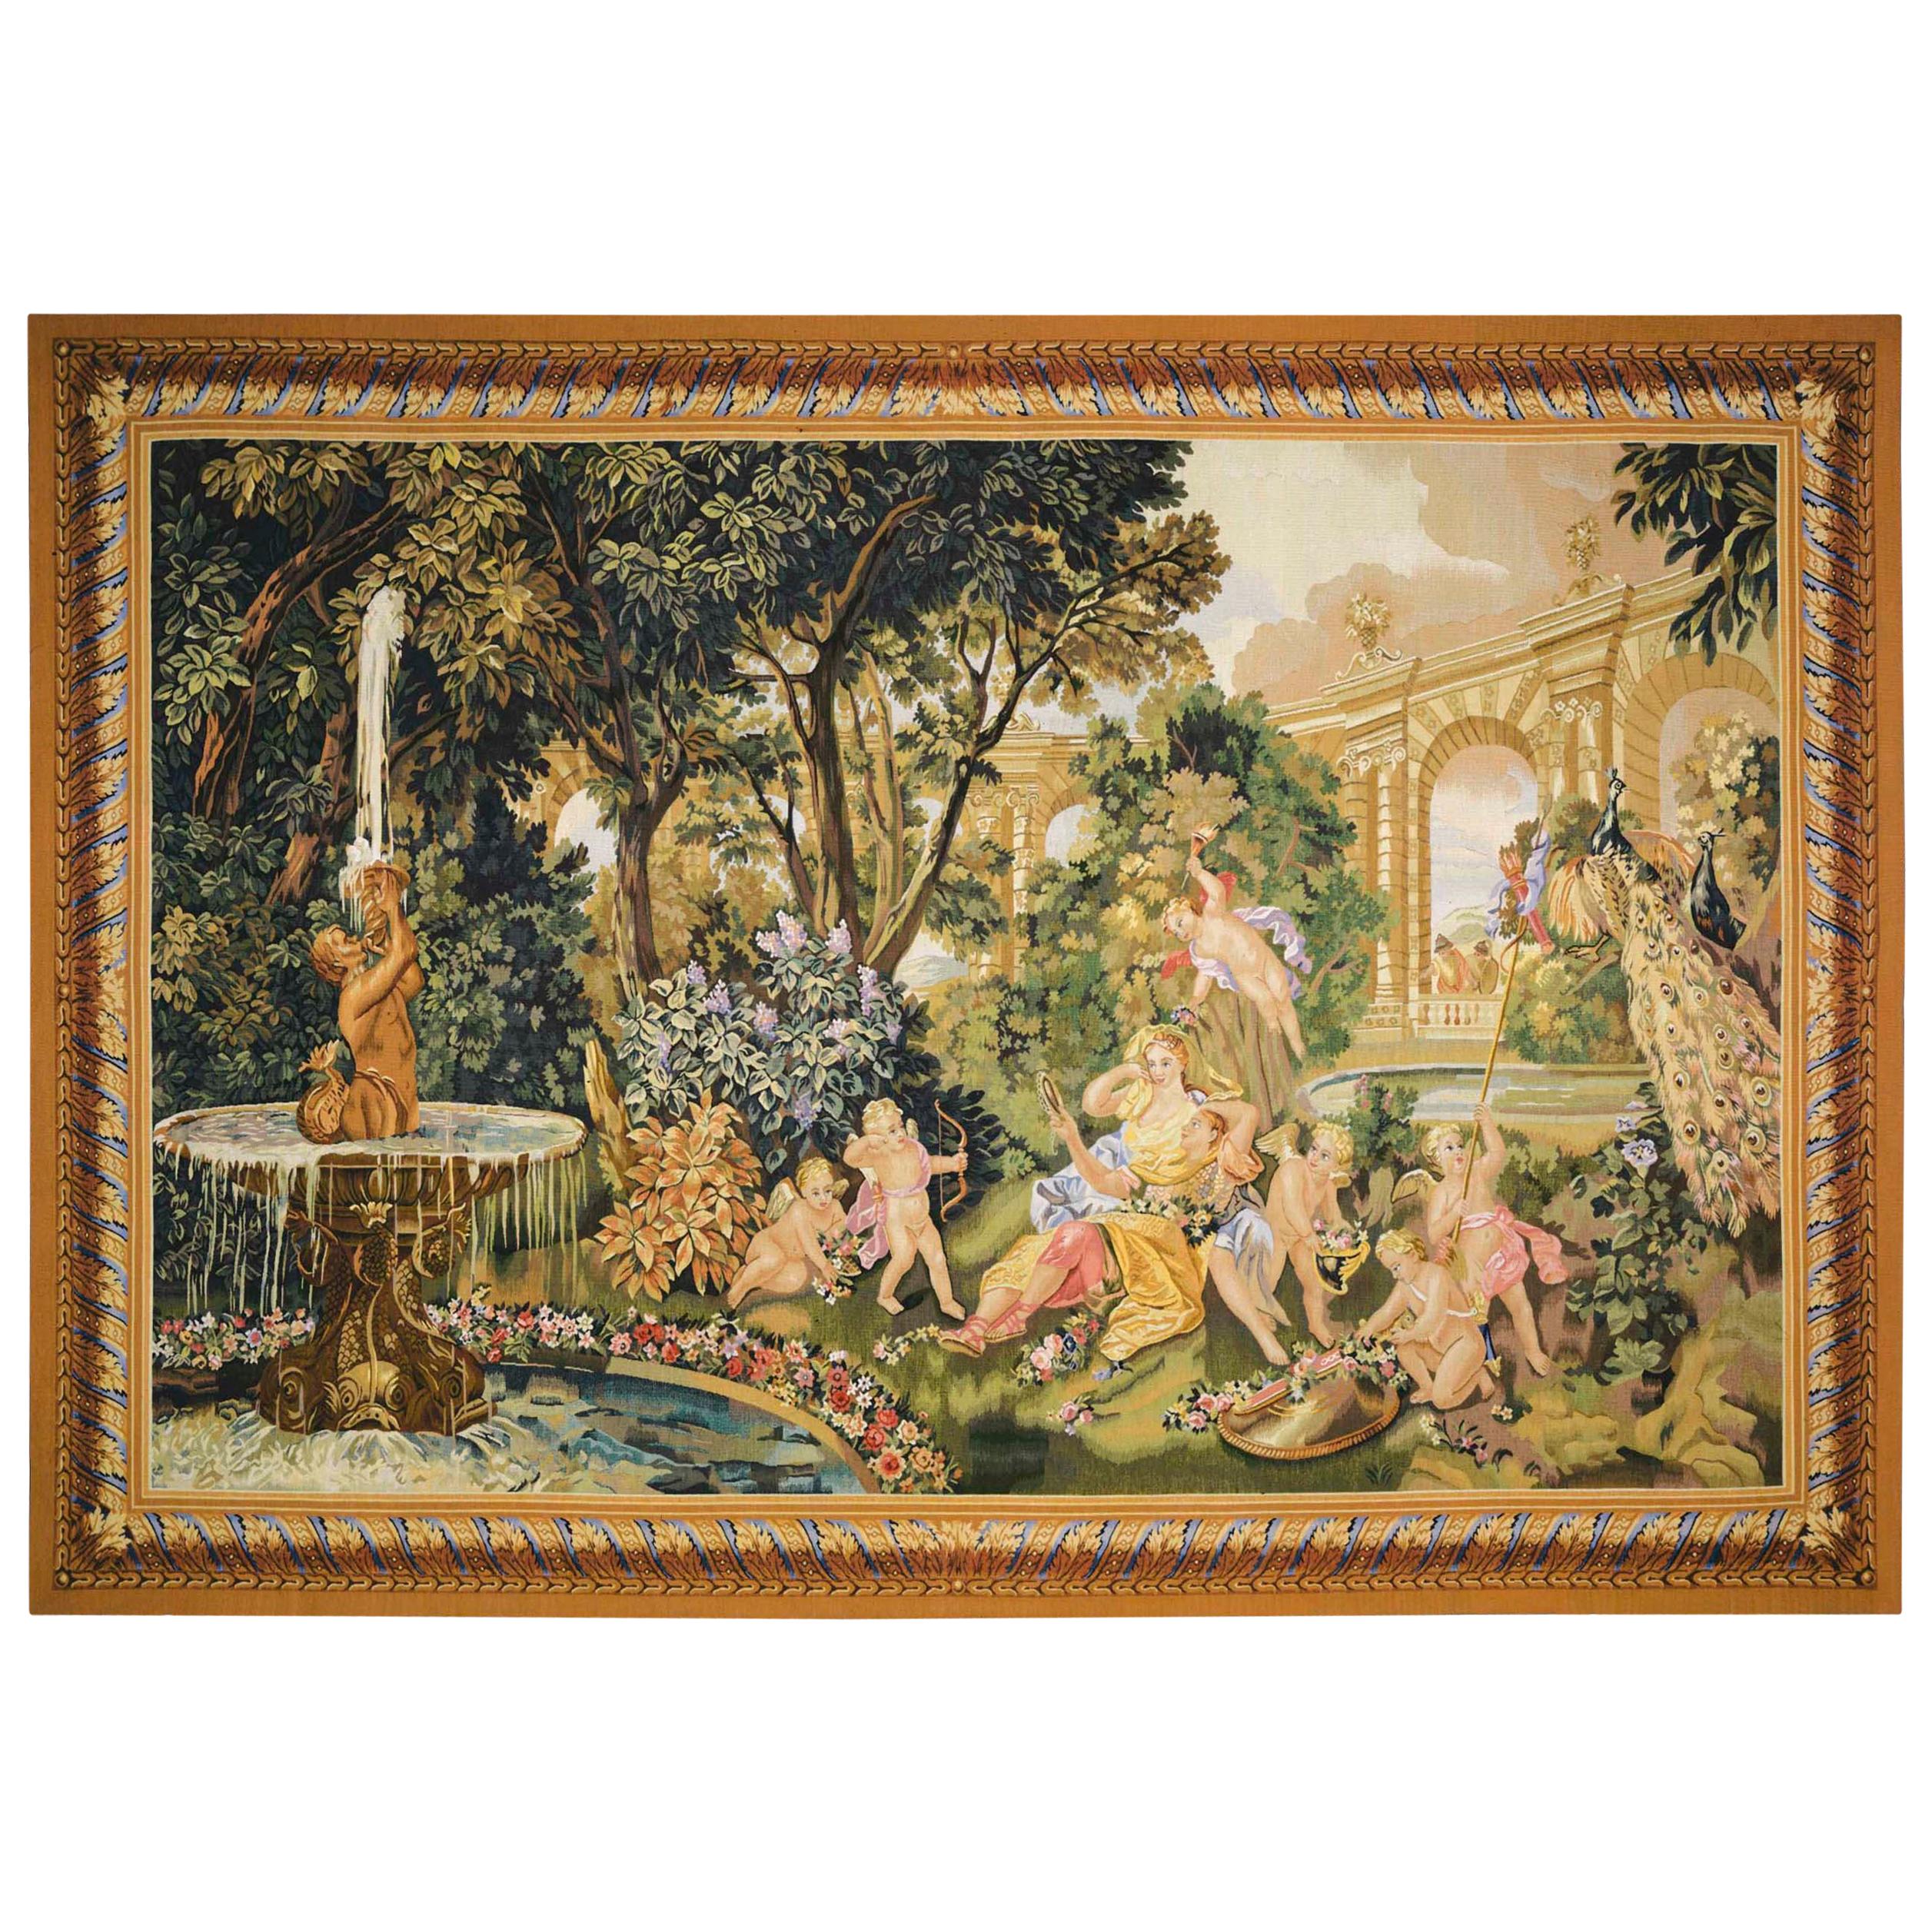 Le Printemps From the Series “Les Enfants Jardiniers” Tapestry